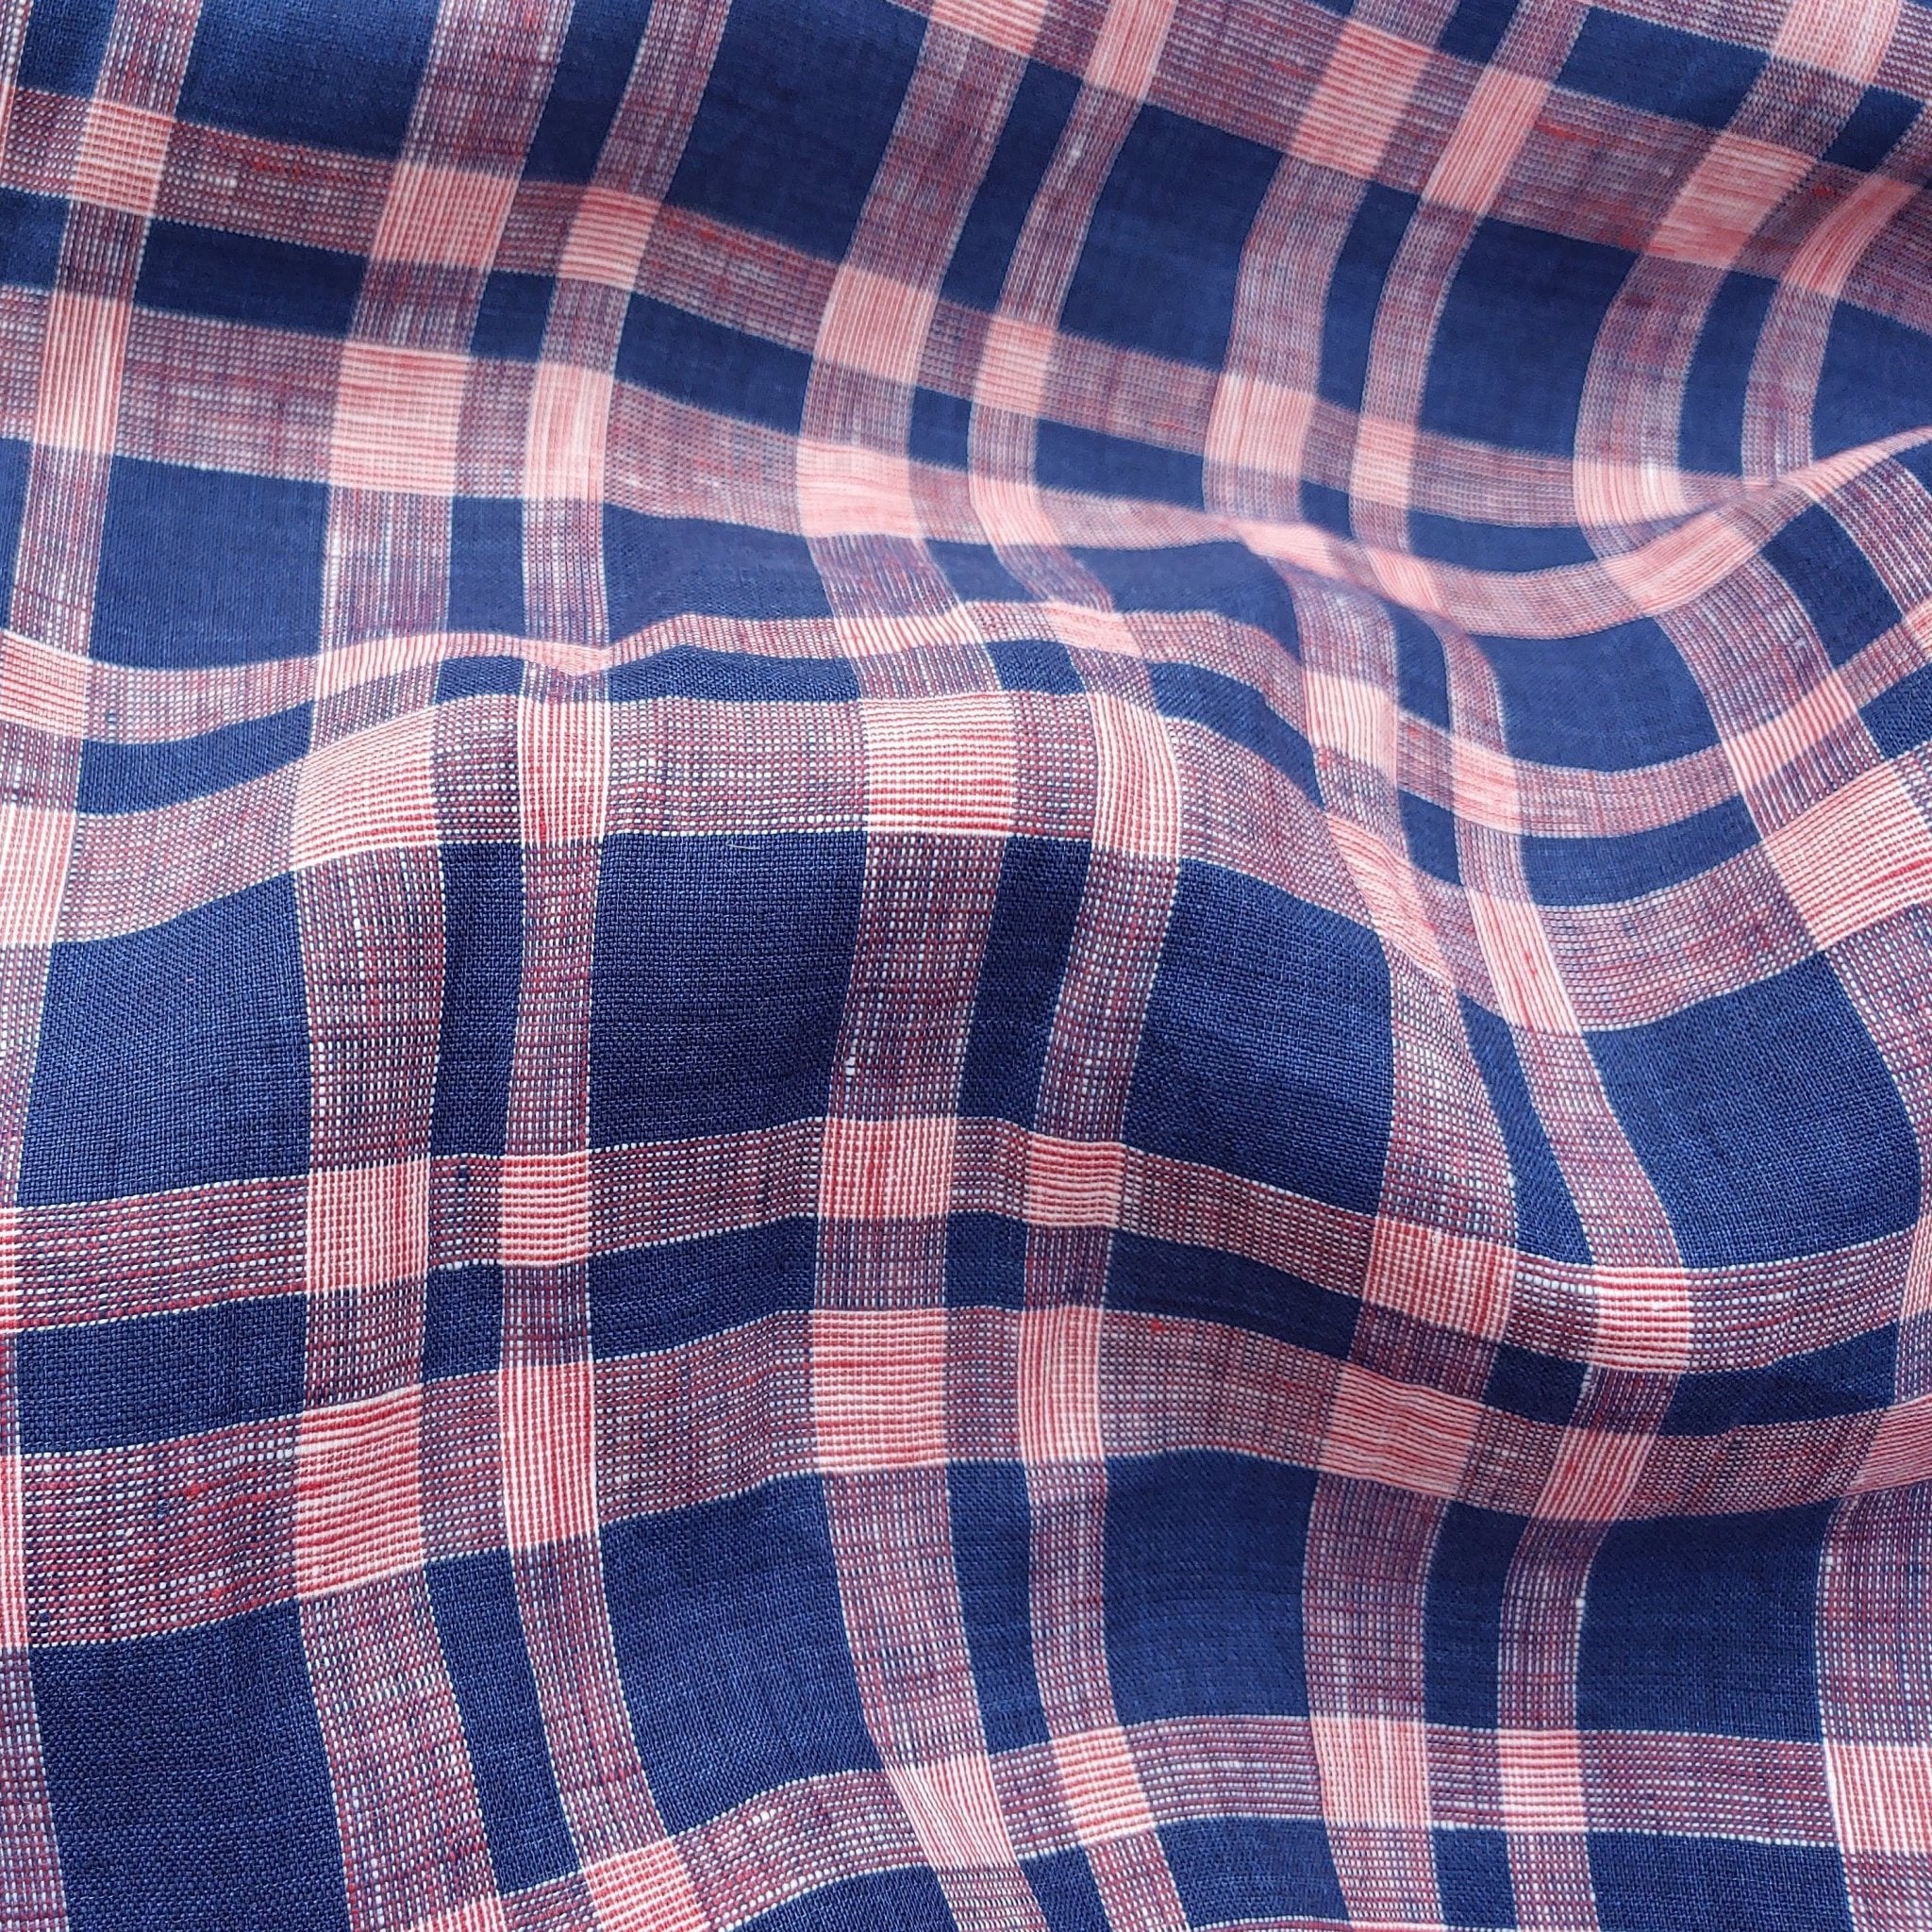 100% Linen Fabric Navy Red Plaid (6275) - The Linen Lab - Navy & Red